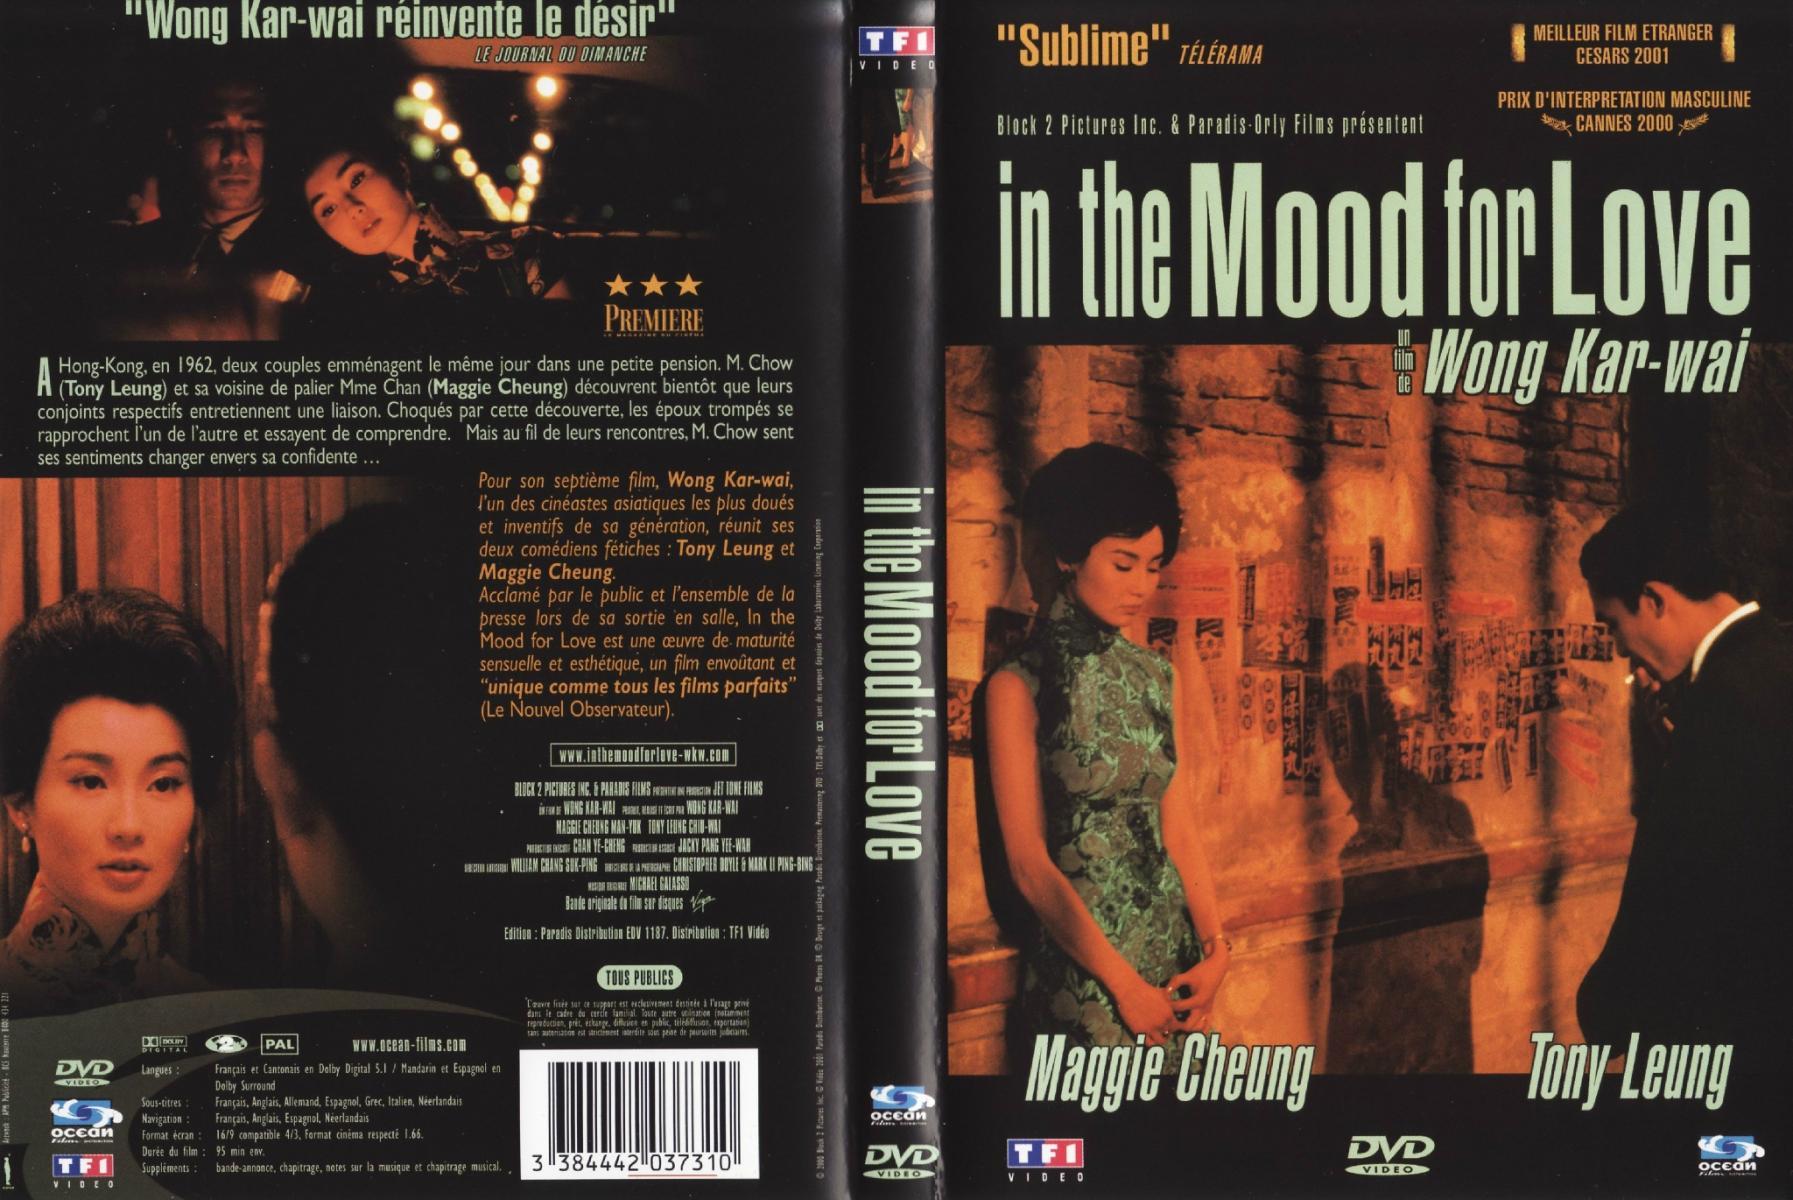 in the mood for love – PAIN SPECIAL - In The Mood For Love Bande Originale